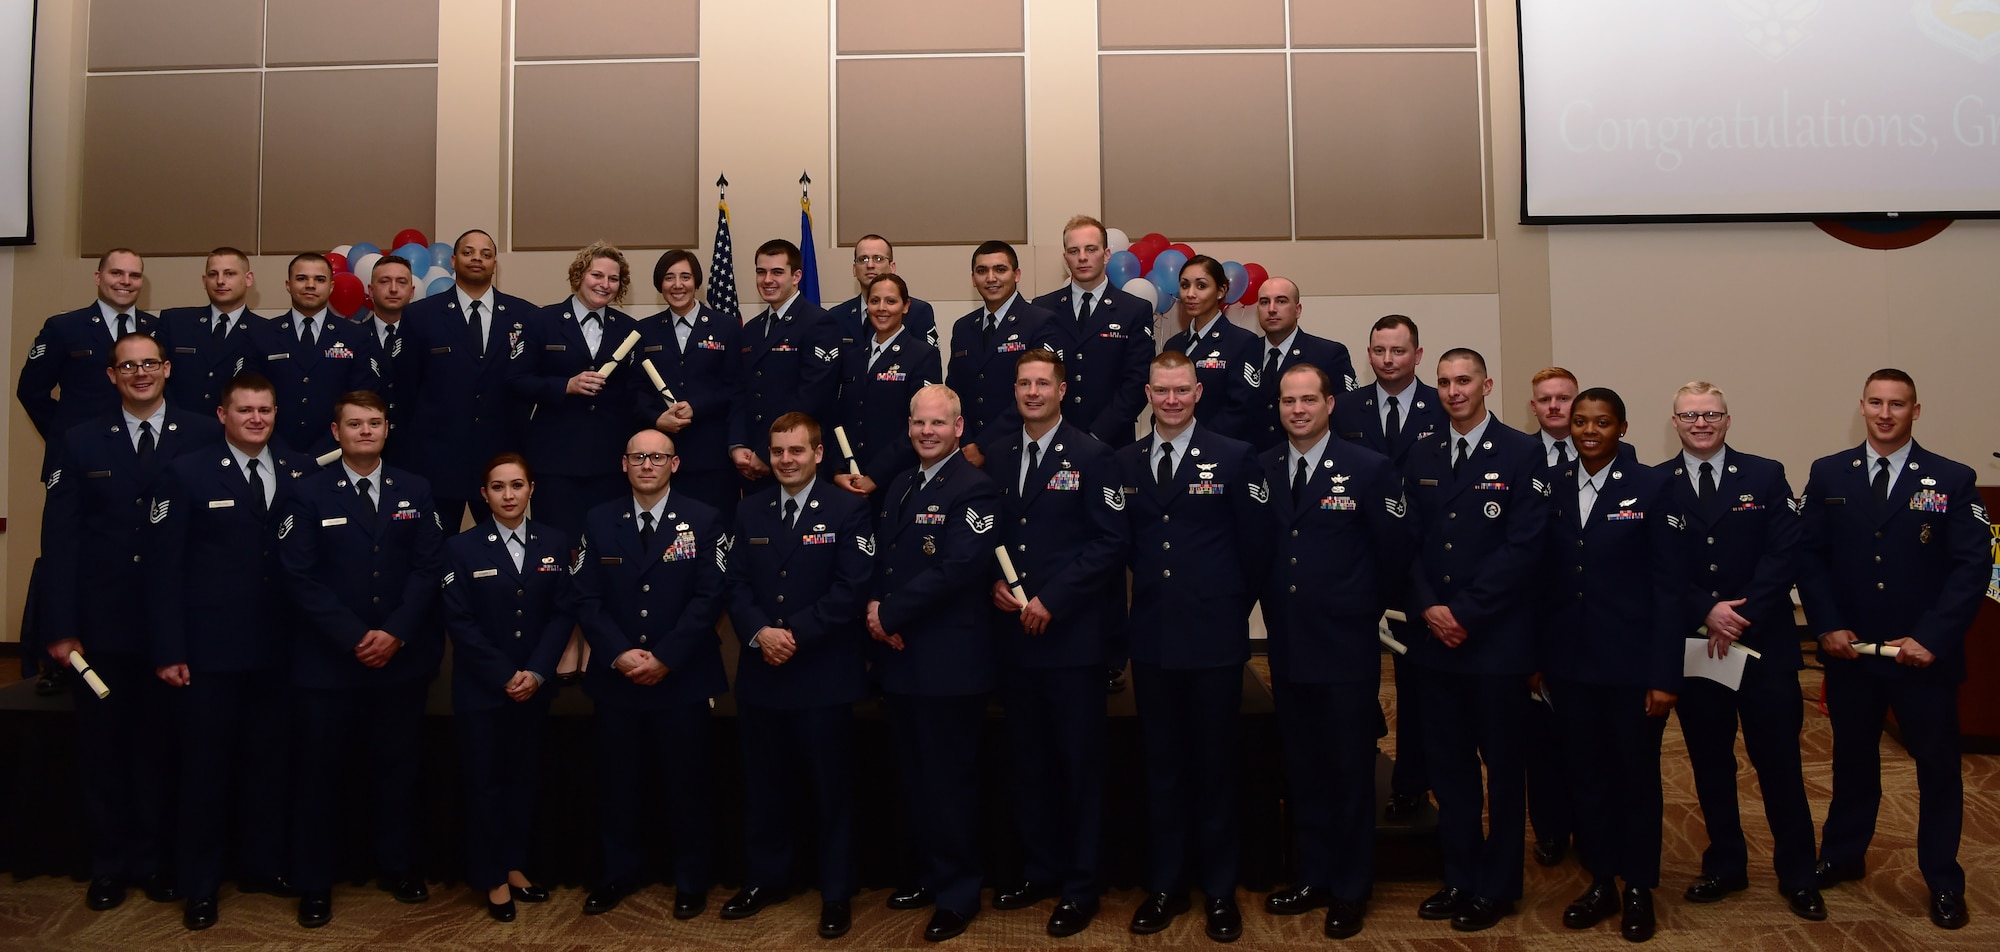 Airmen from Buckley Air Force Base graduated from The Community College of the Air Force, May 24, in a ceremony at the Leadership Development Center here. (U.S. Air Force photo by Airman 1st Class Jessica Huggins)